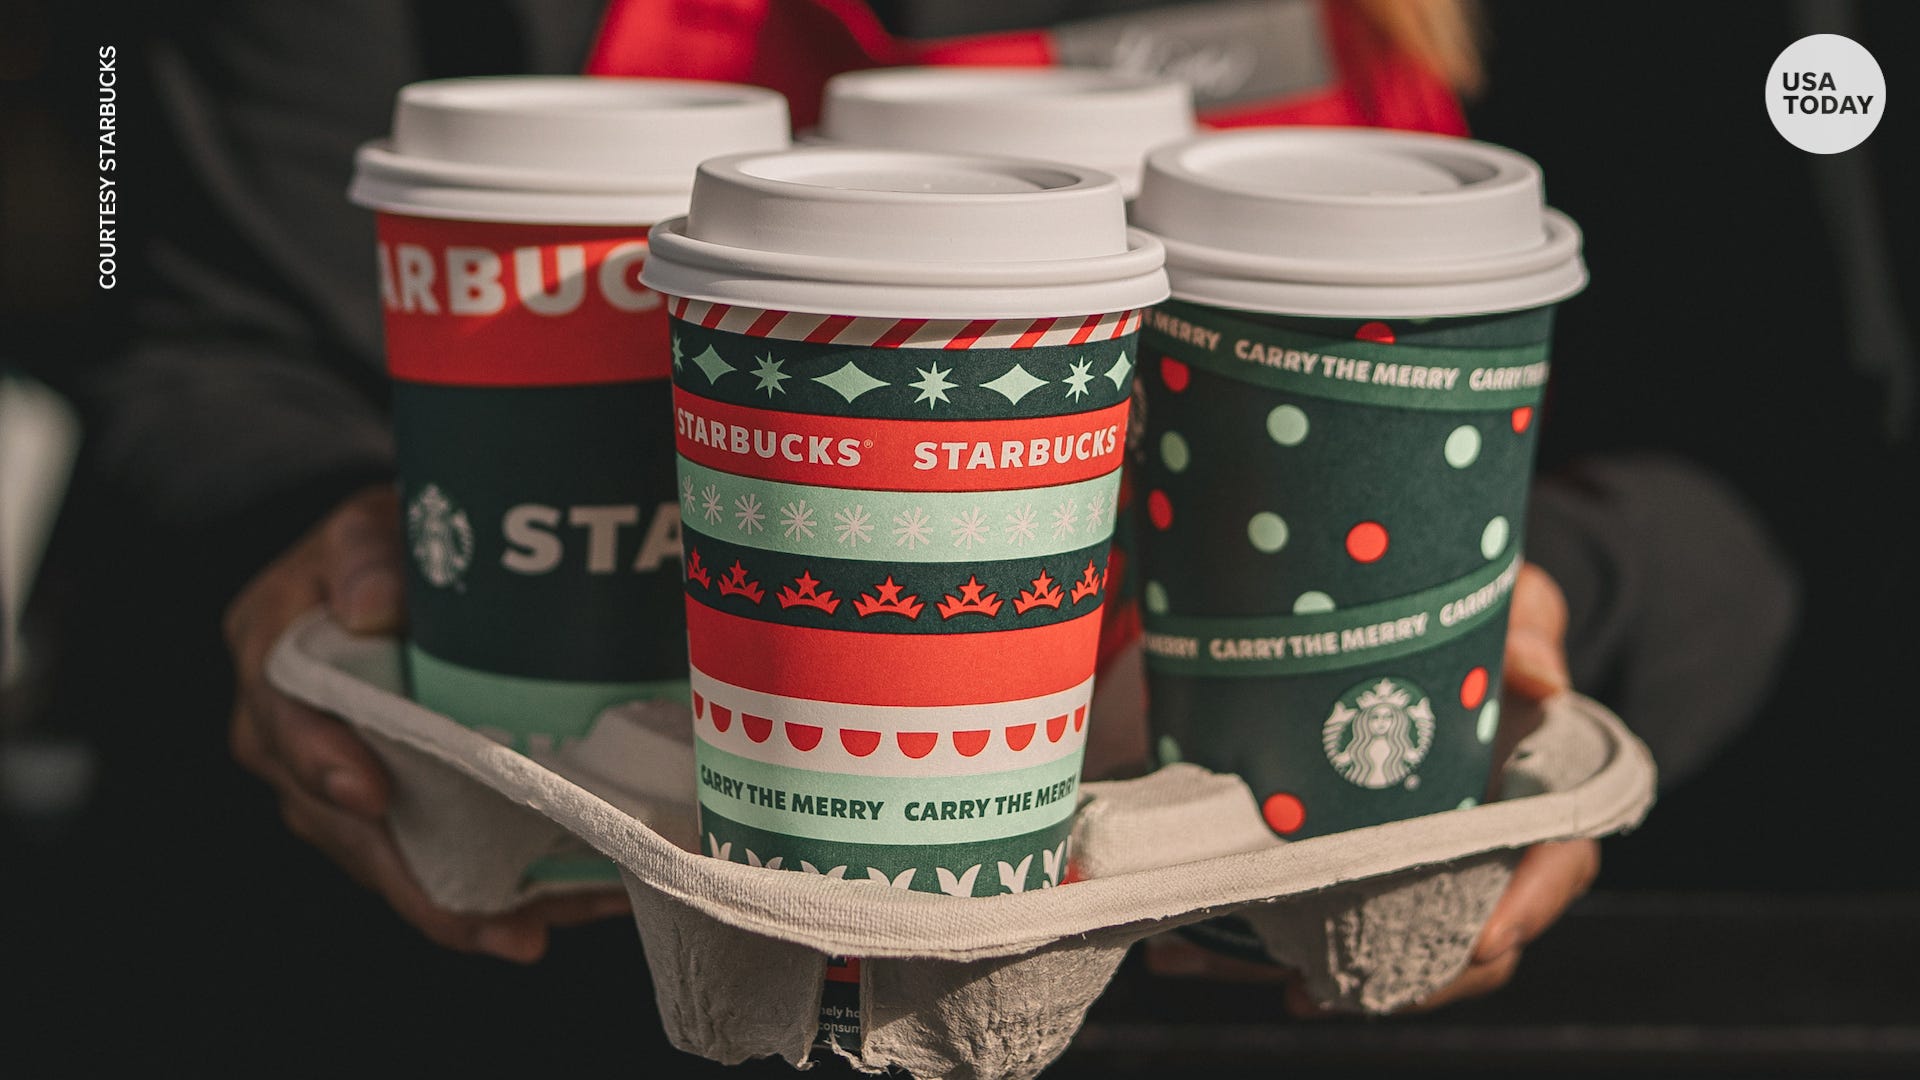 Starbucks debuts newest free reusable red cup. Here’s what past years